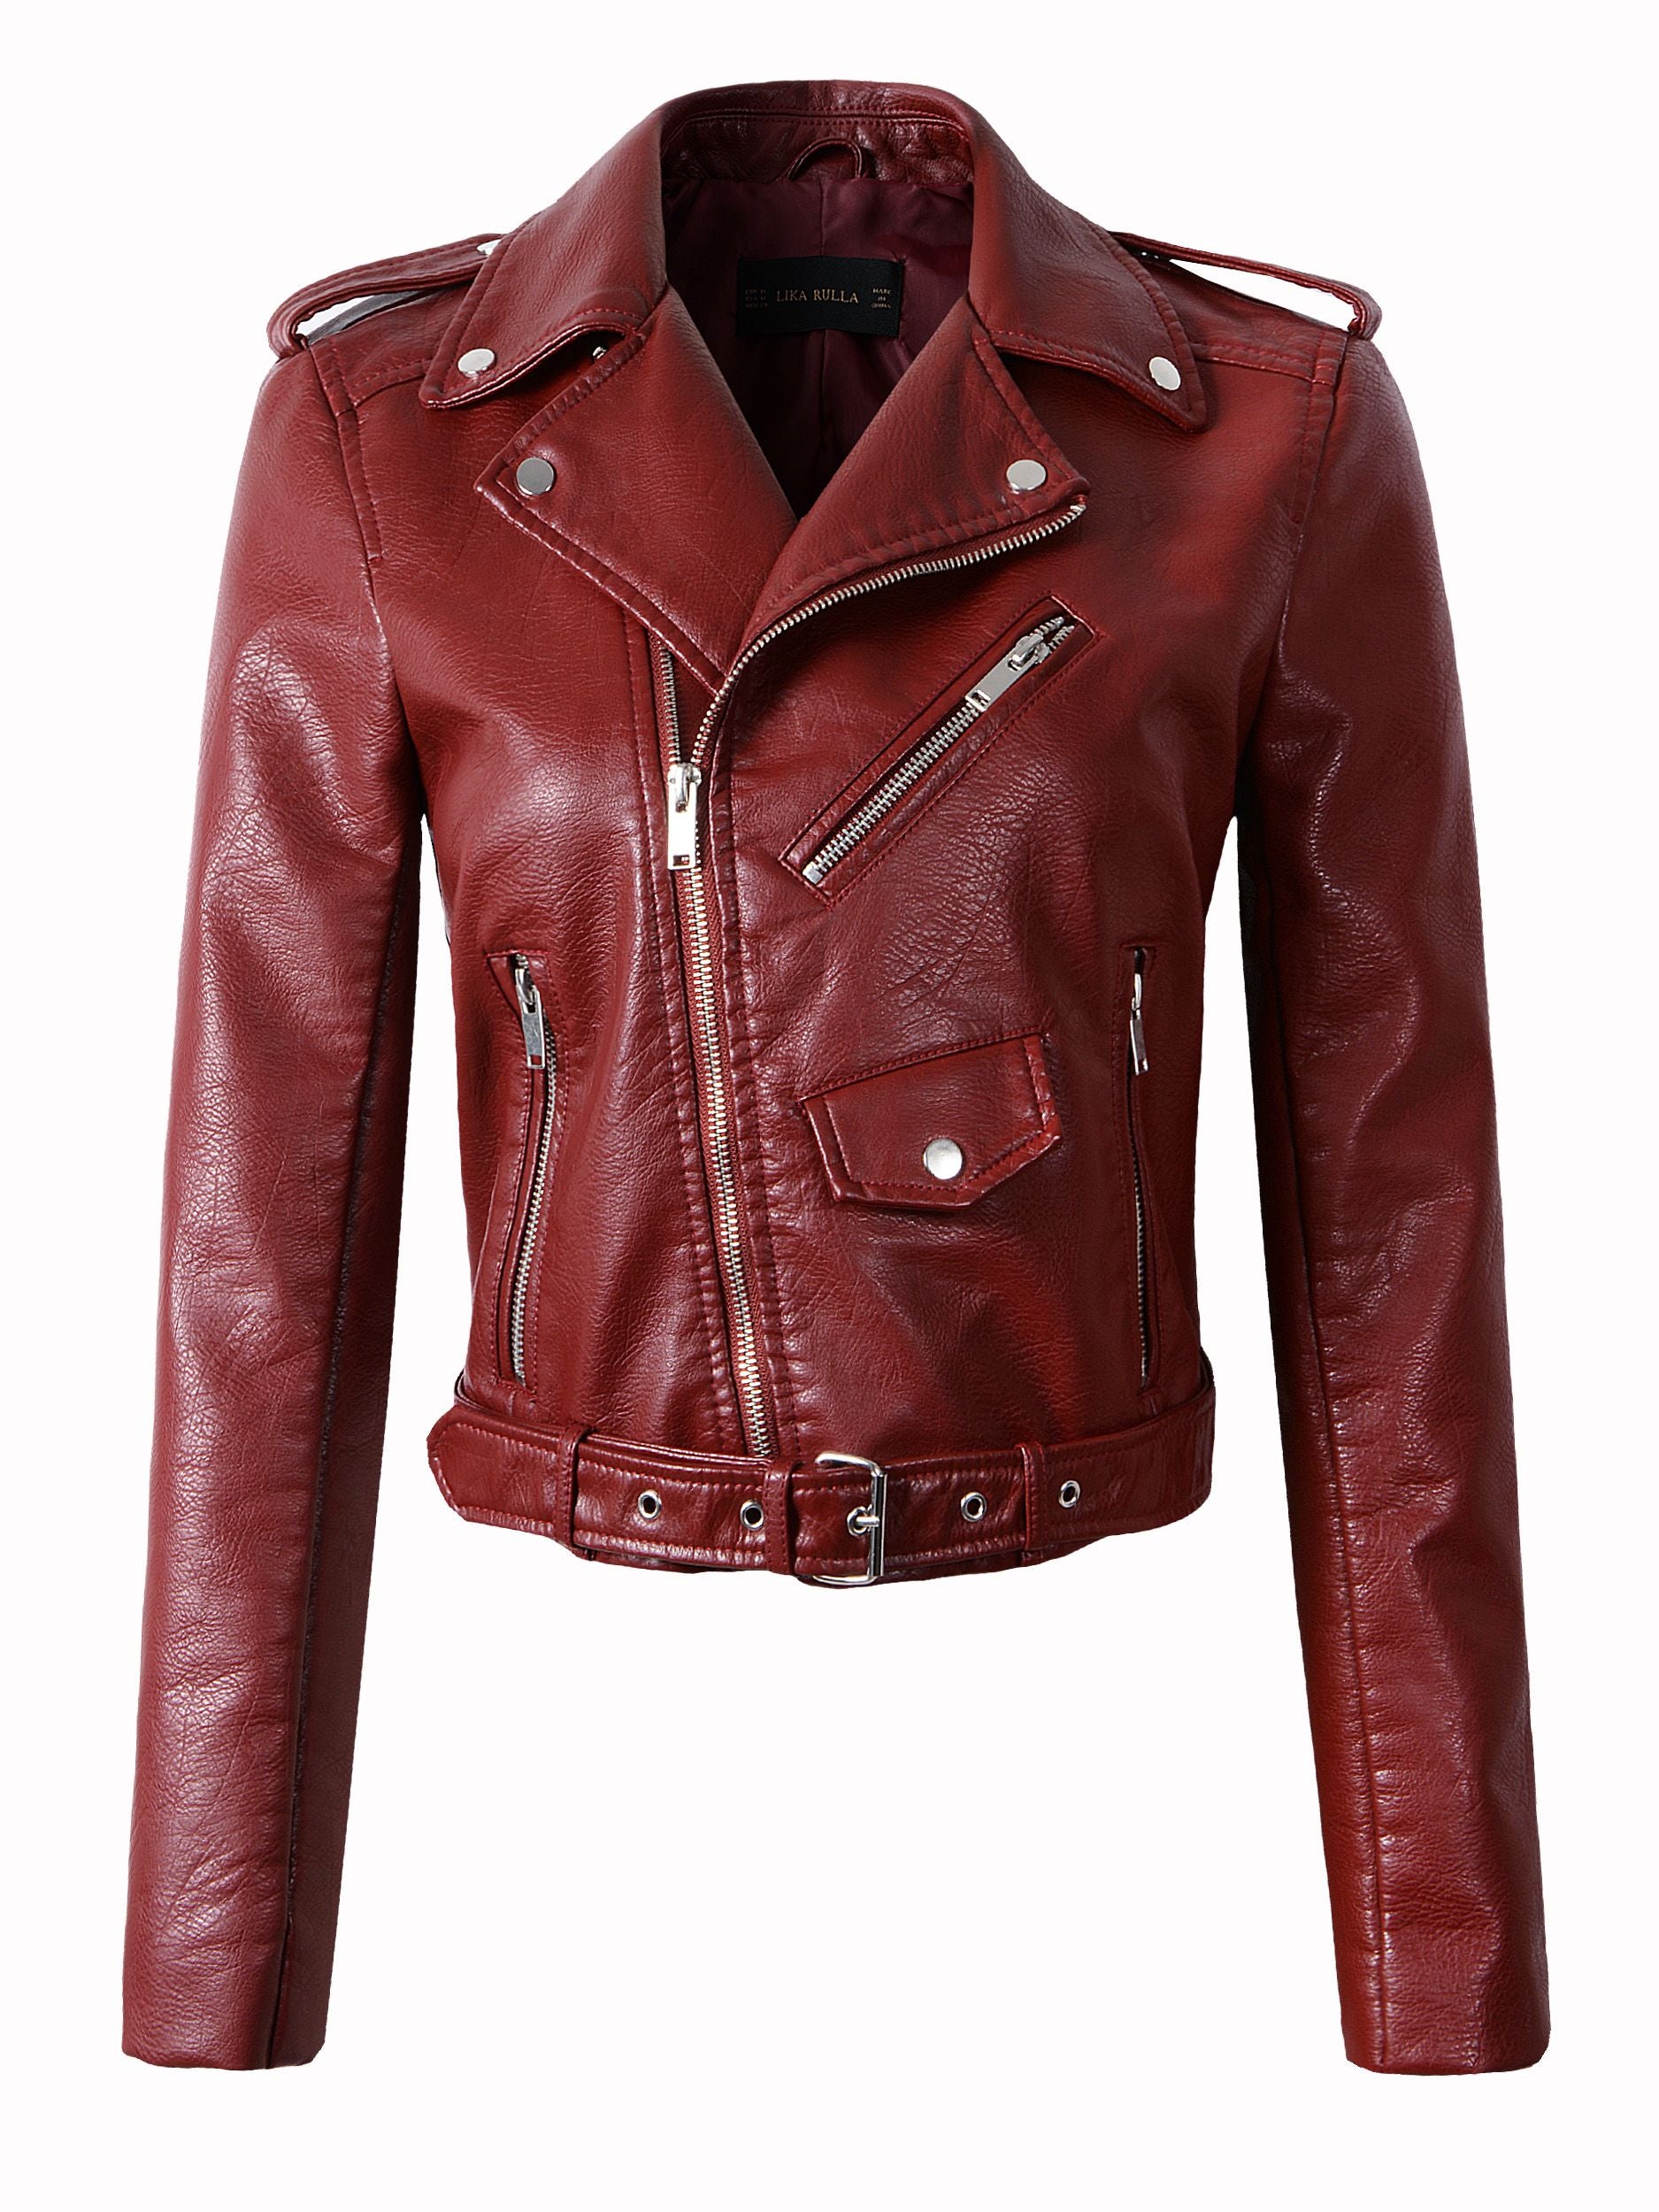 Motorcycle Leather PU Jackets - Forever Growth 